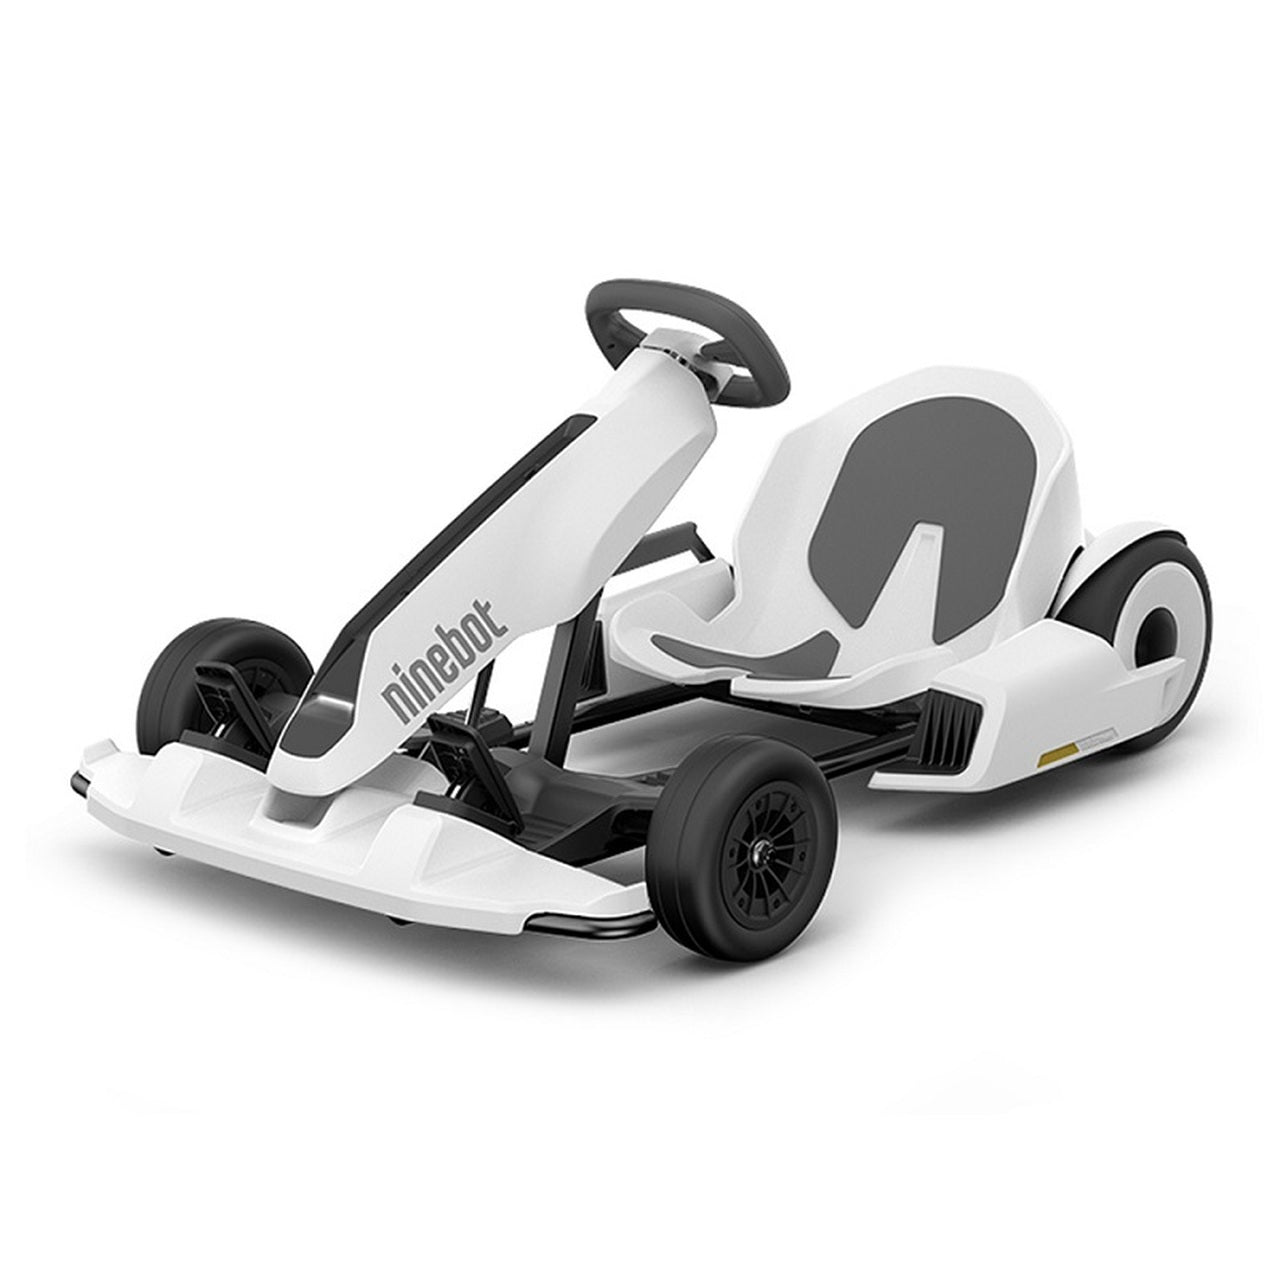 Buy the Ninebot Segway Gokart Kit Combo with Ninebot S self-balancing device from Segway of Ontario / M4M in Toronto, Canada.